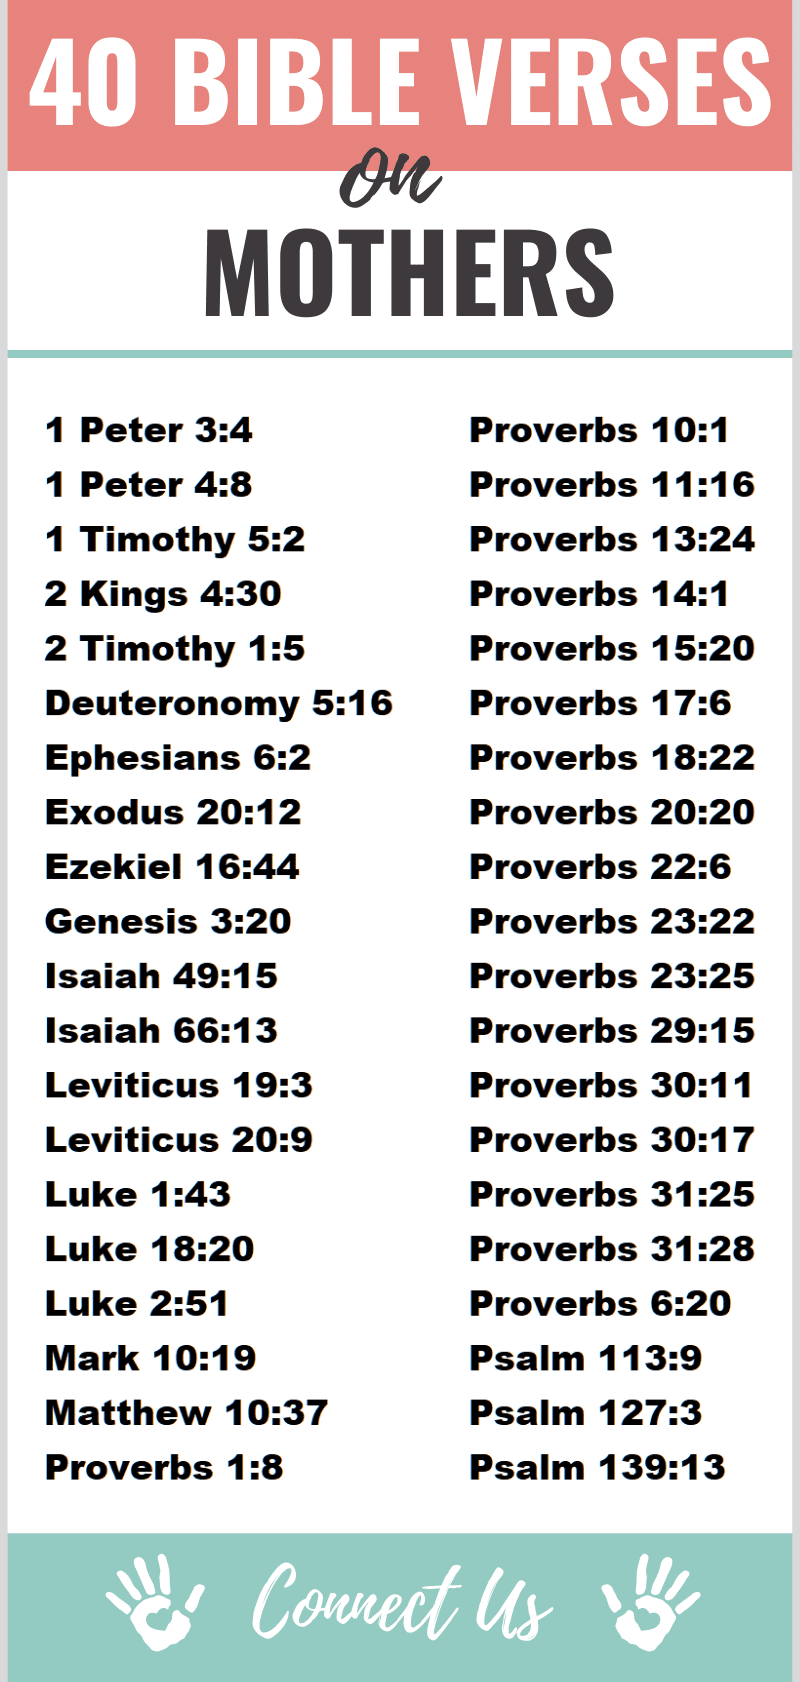 Bible Verses on Mothers